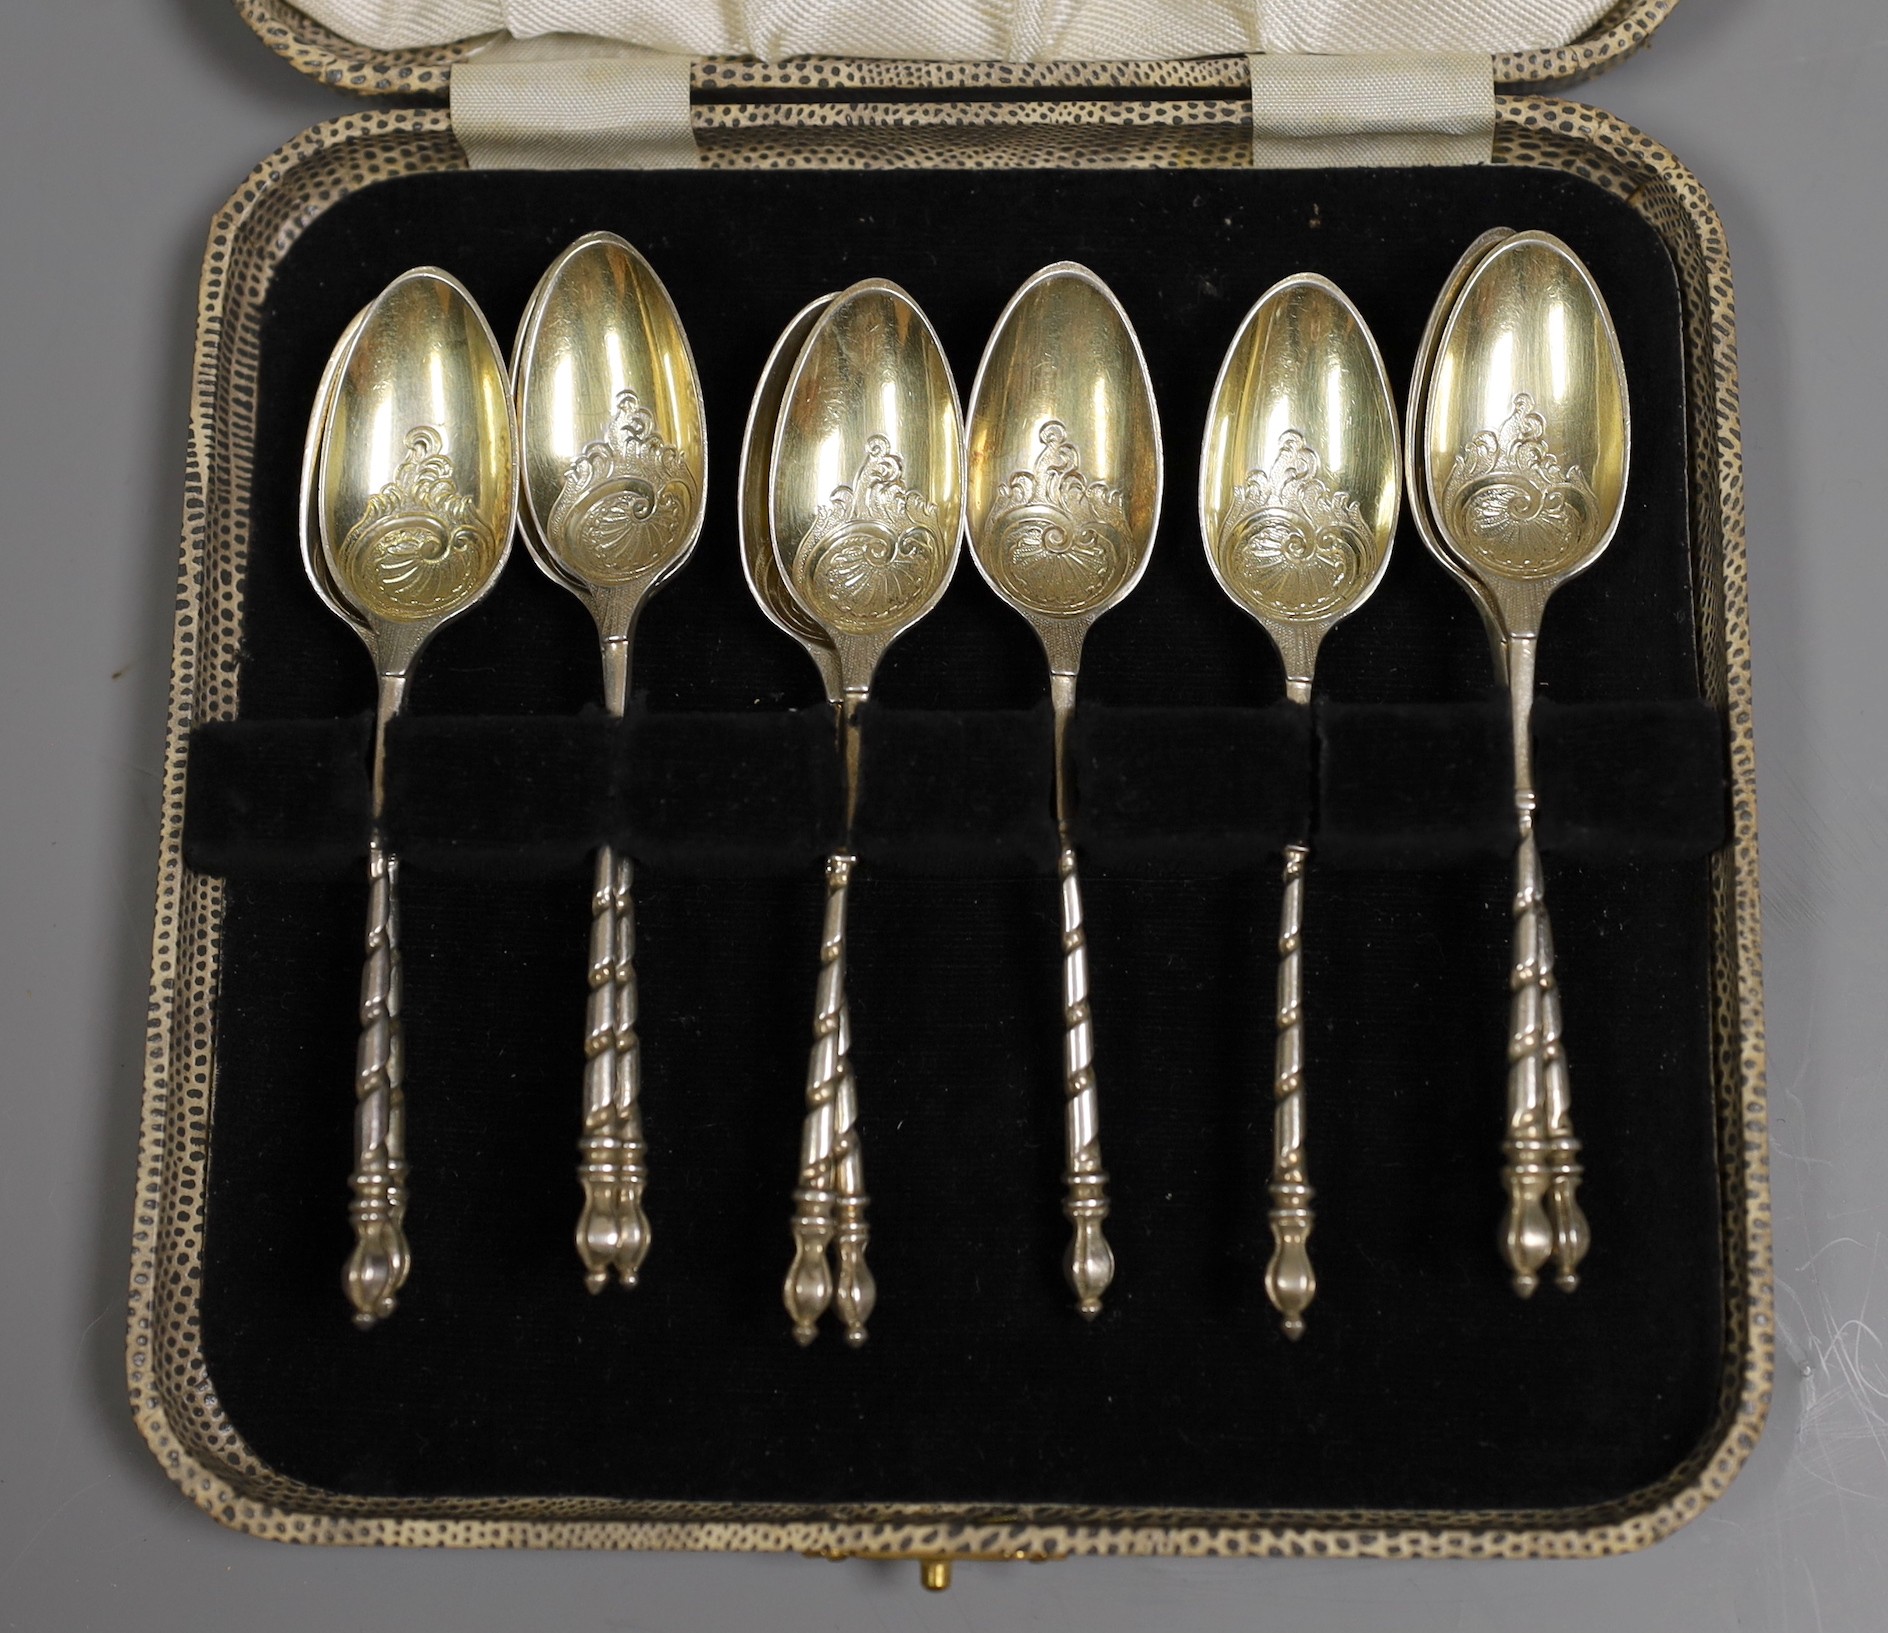 A set of ten Victorian chased silver tea spoons, by George Adams, London, 1874, 135 grams.